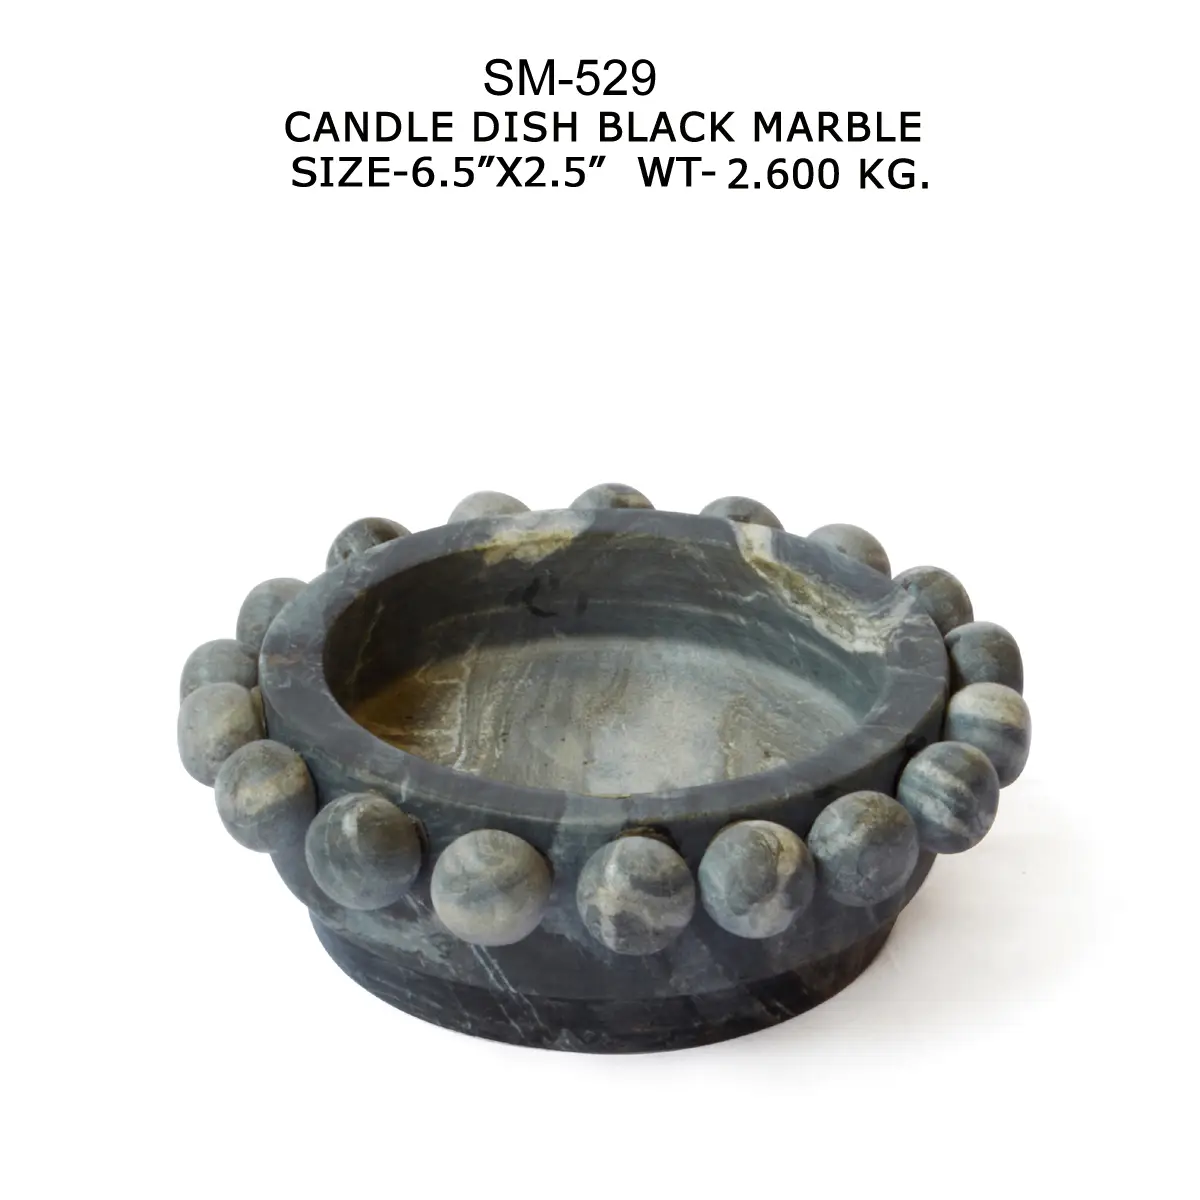 CANDLE DISH BLACK MARBLE